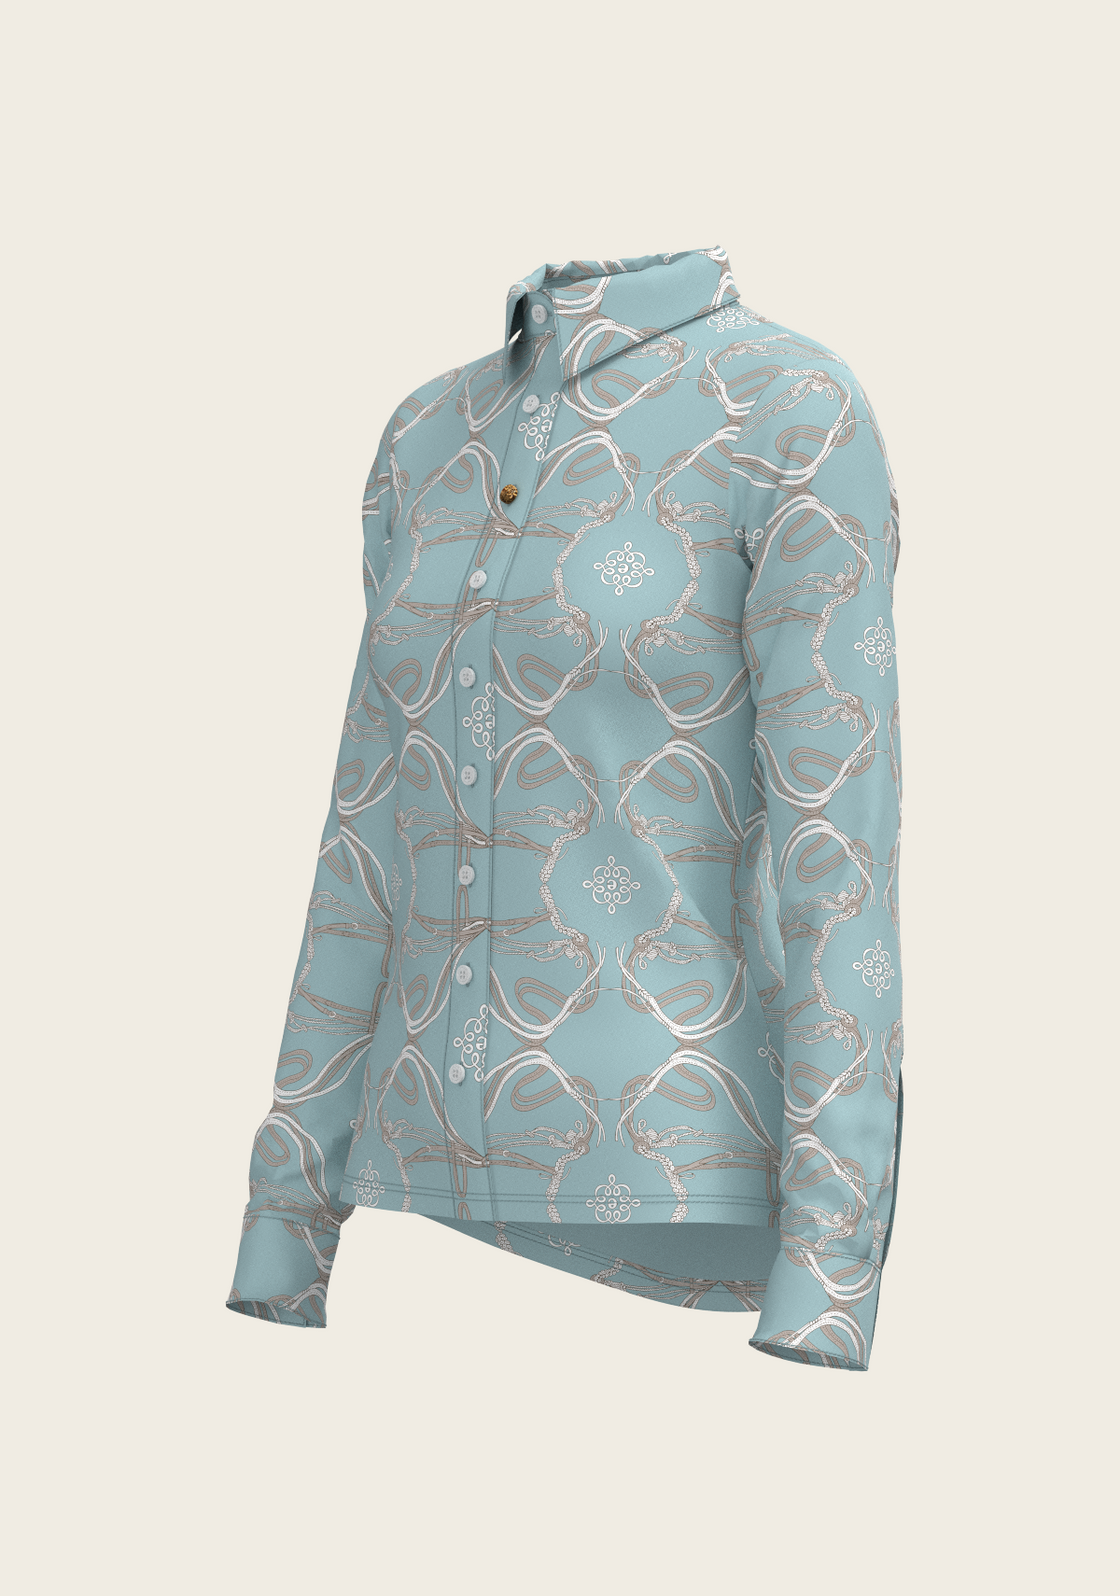 Roped Bridles on Sky Blue Ladies Button Shirt